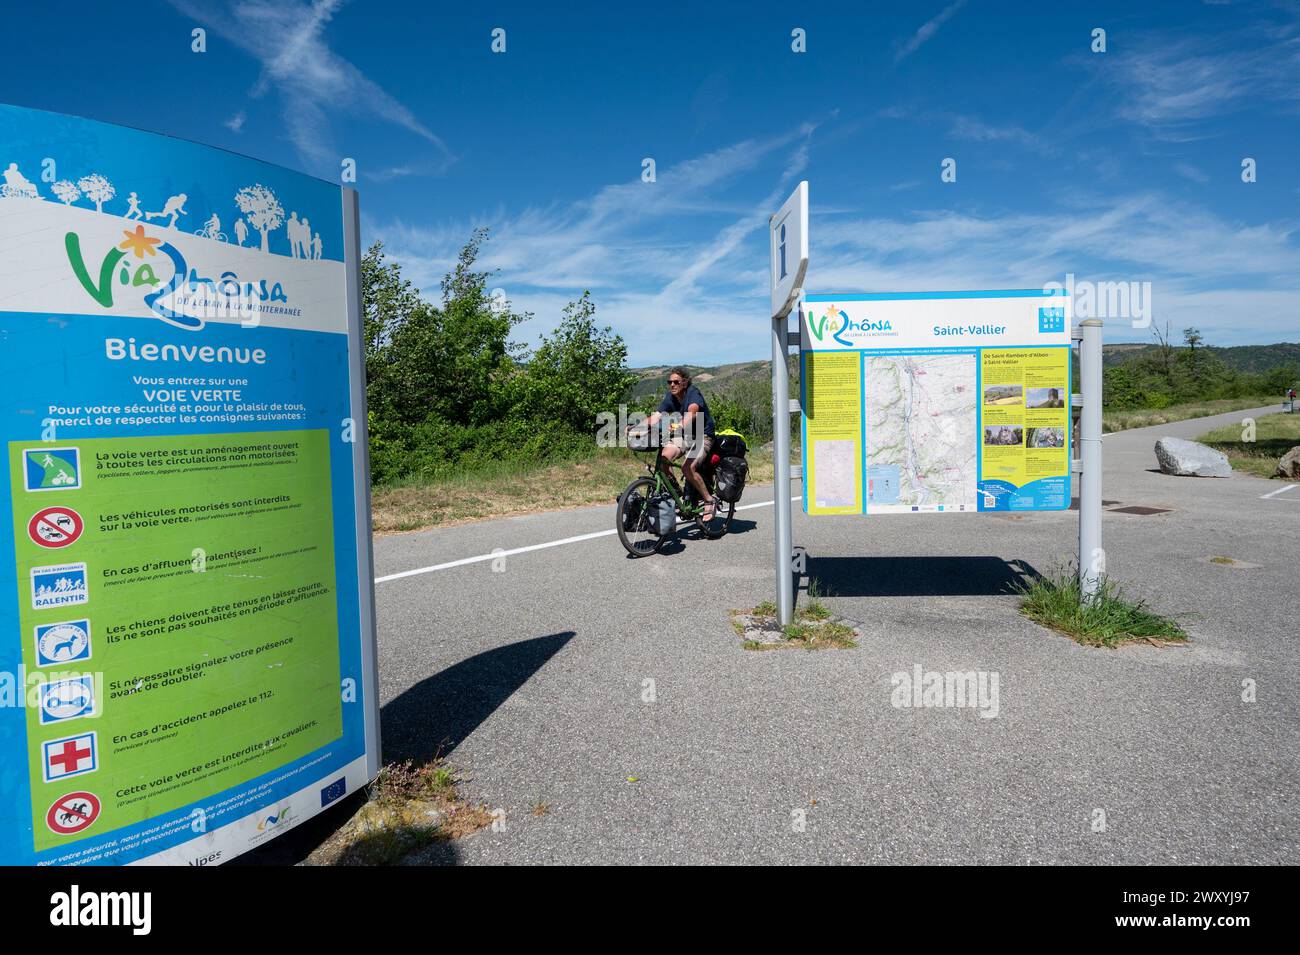 Saint-Vallier (south-eastern France): cycle lane Viarhona, walking and cycling path along the River Rhone, from Lake Geneva to the Mediterranean Sea, Stock Photo